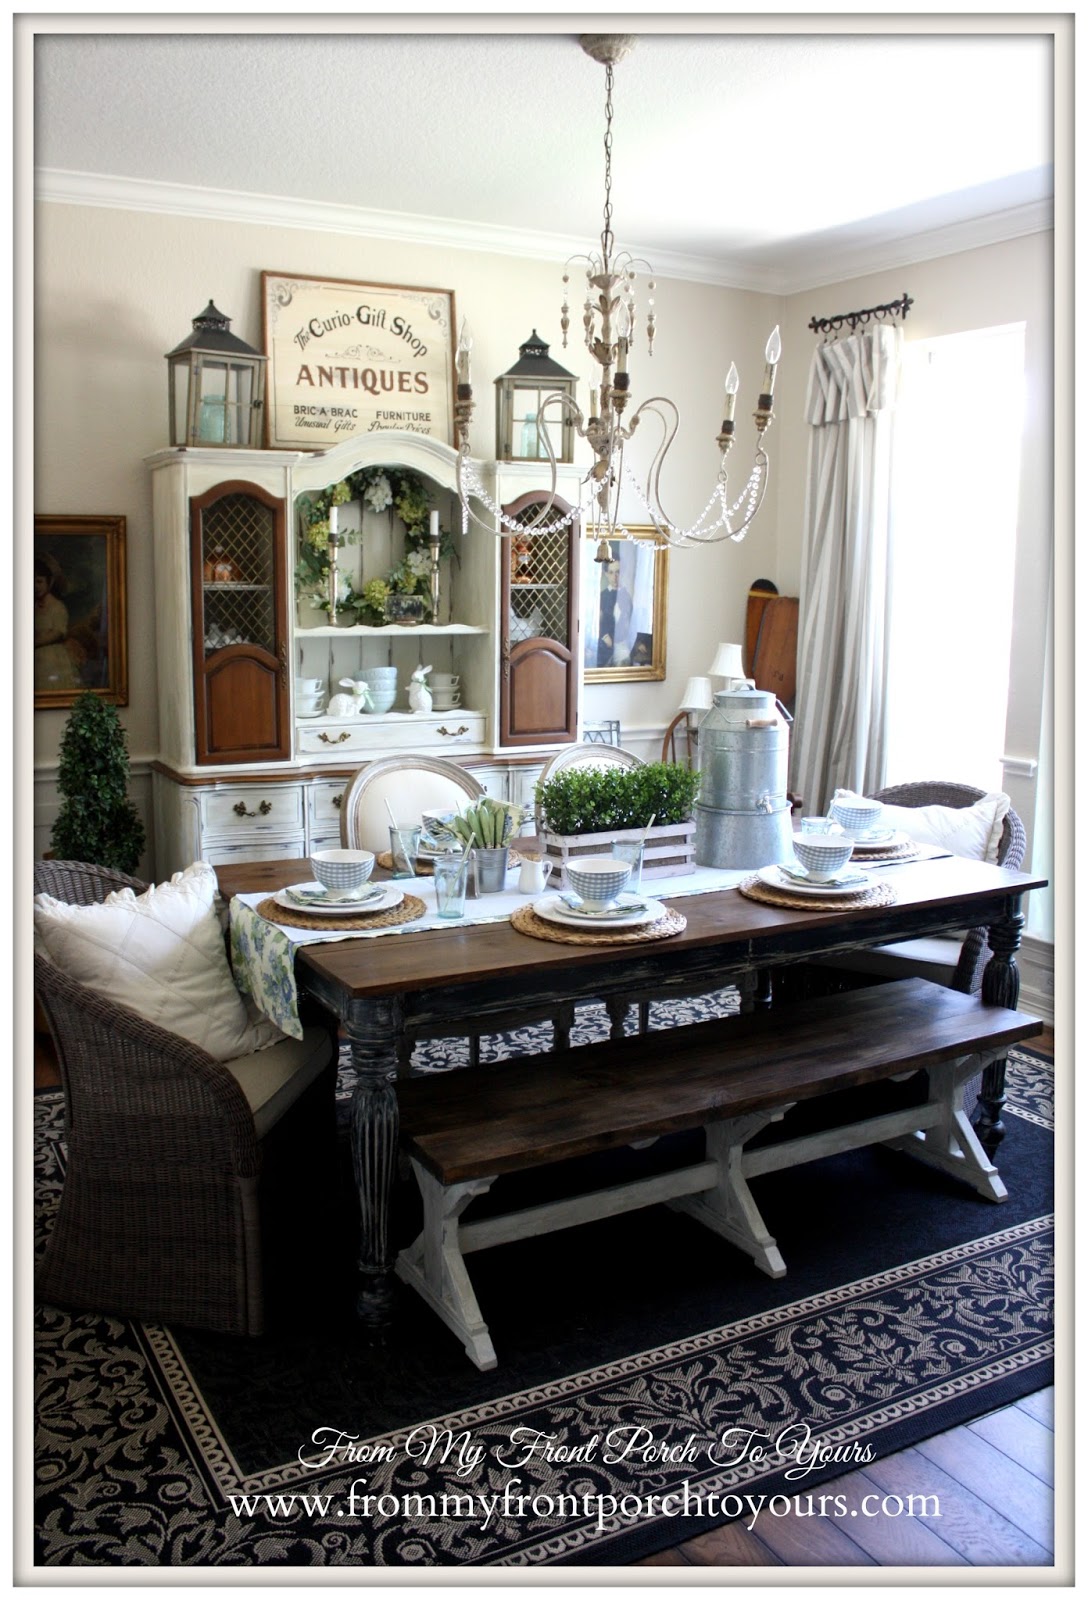 French Farmhouse Dining Room set for Spring Brunch